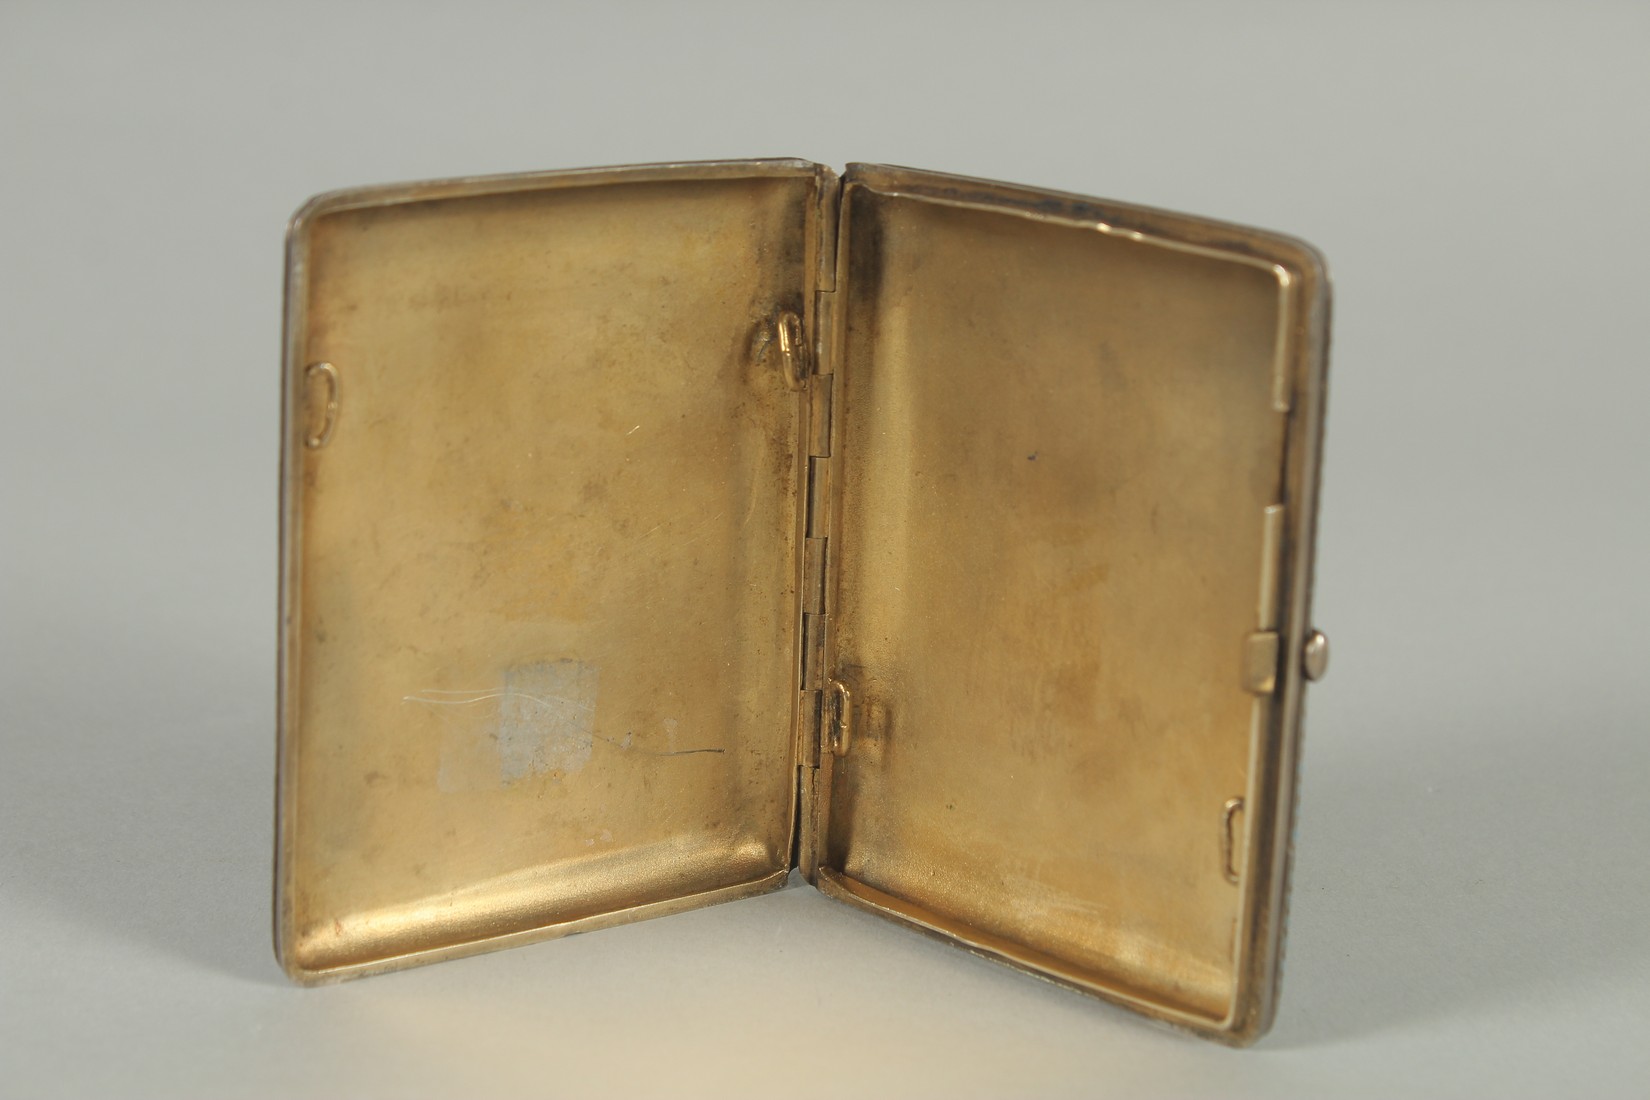 A RUSSIAN SILVER AND ENAMEL CIGARETTE CASE. 9.5cm x 7.5cm. Mark: head 87., B.P. Weight:105gms. - Image 3 of 4